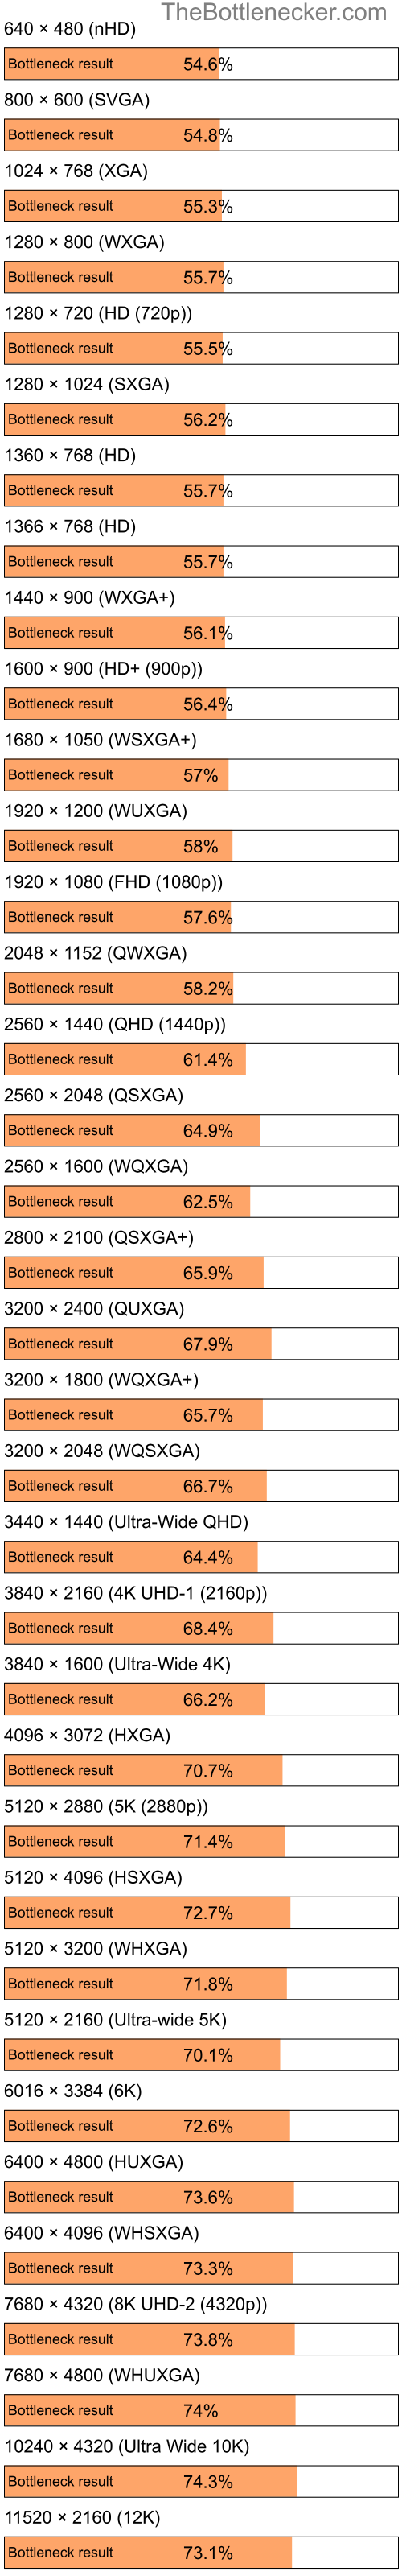 Bottleneck results by resolution for Intel Pentium 4 and AMD Radeon HD 4200 in General Tasks